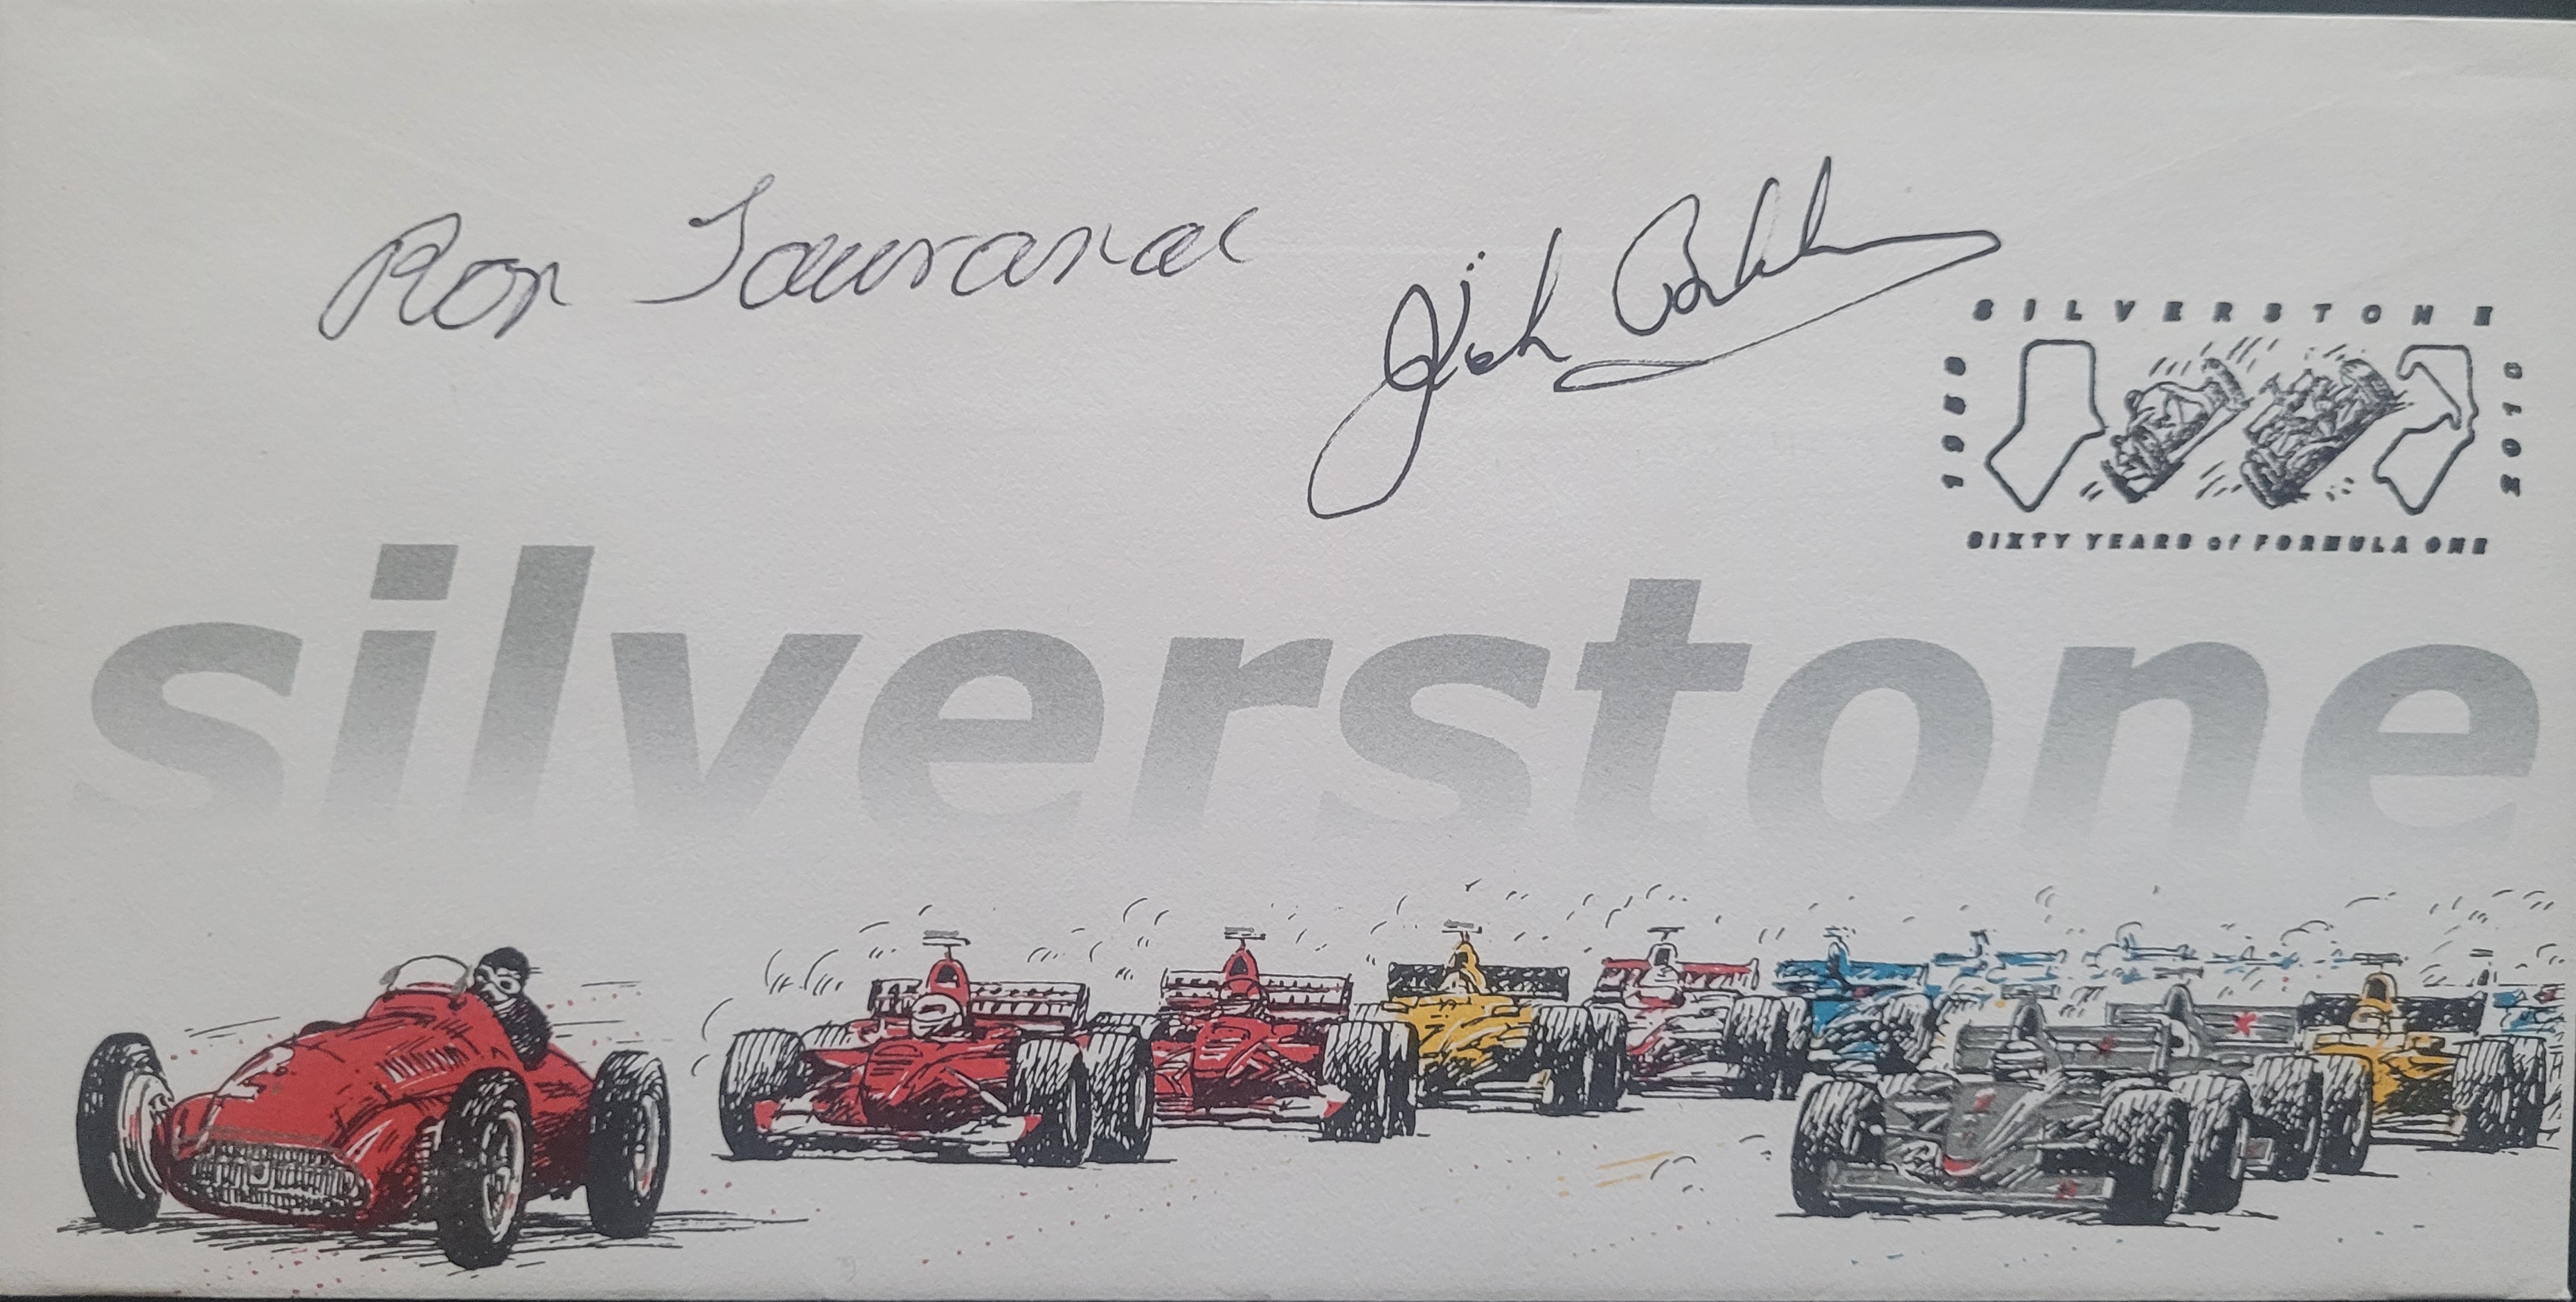 2010 SILVERSTONE MOTOR RACING LTD EDITION POSTAL COVER AUTOGRAPHED BY JACK BRABHAM & RON TAURANAC